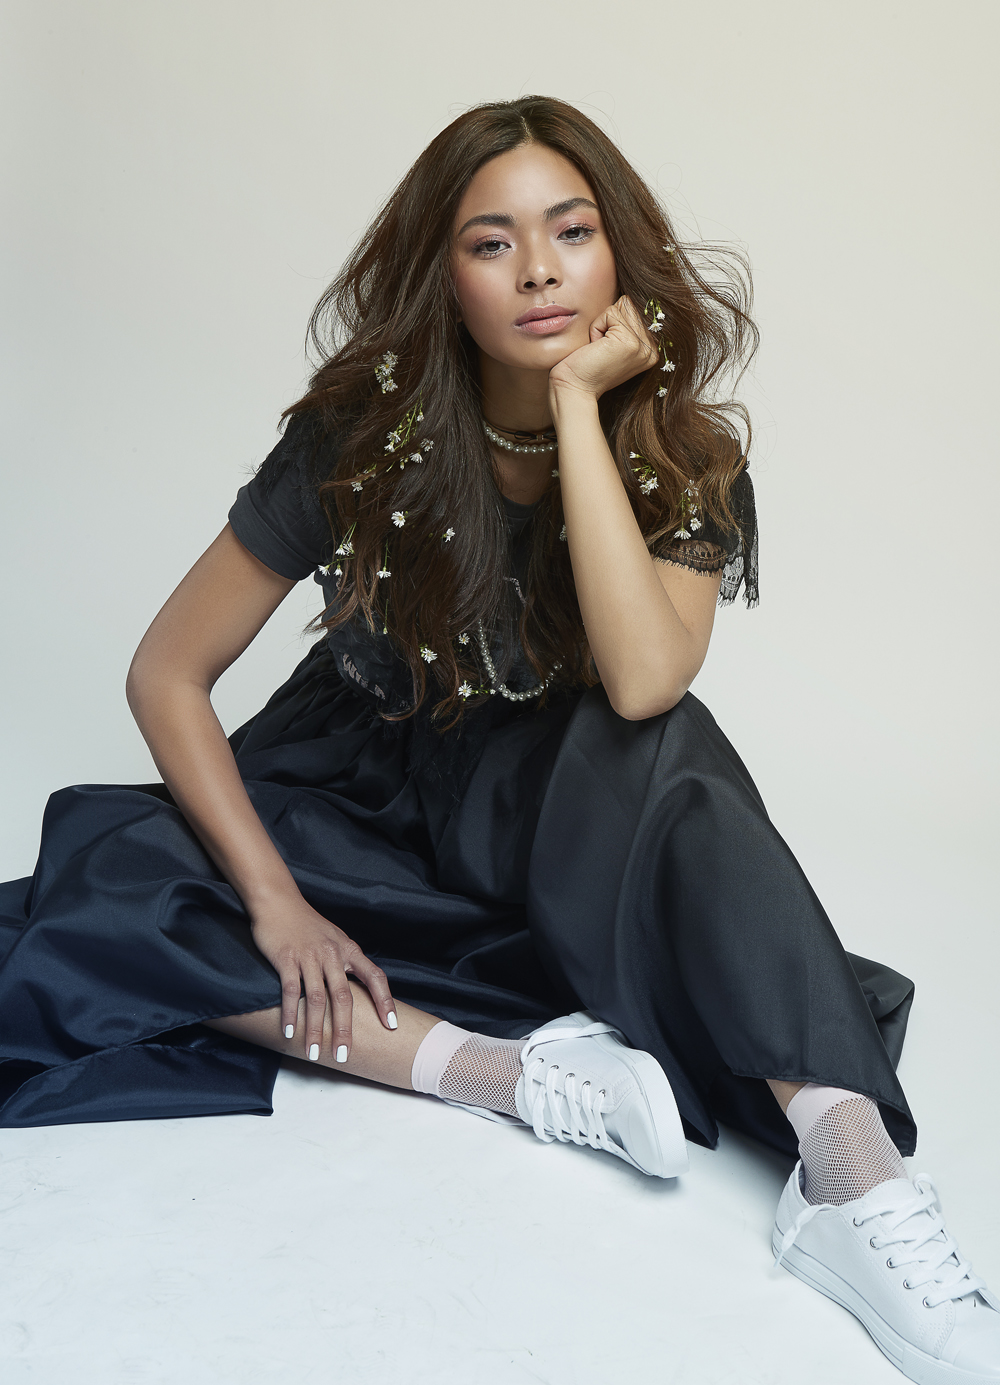 Maxine Medina Is Done Trying to Prove Herself to the Universe | Preview.ph